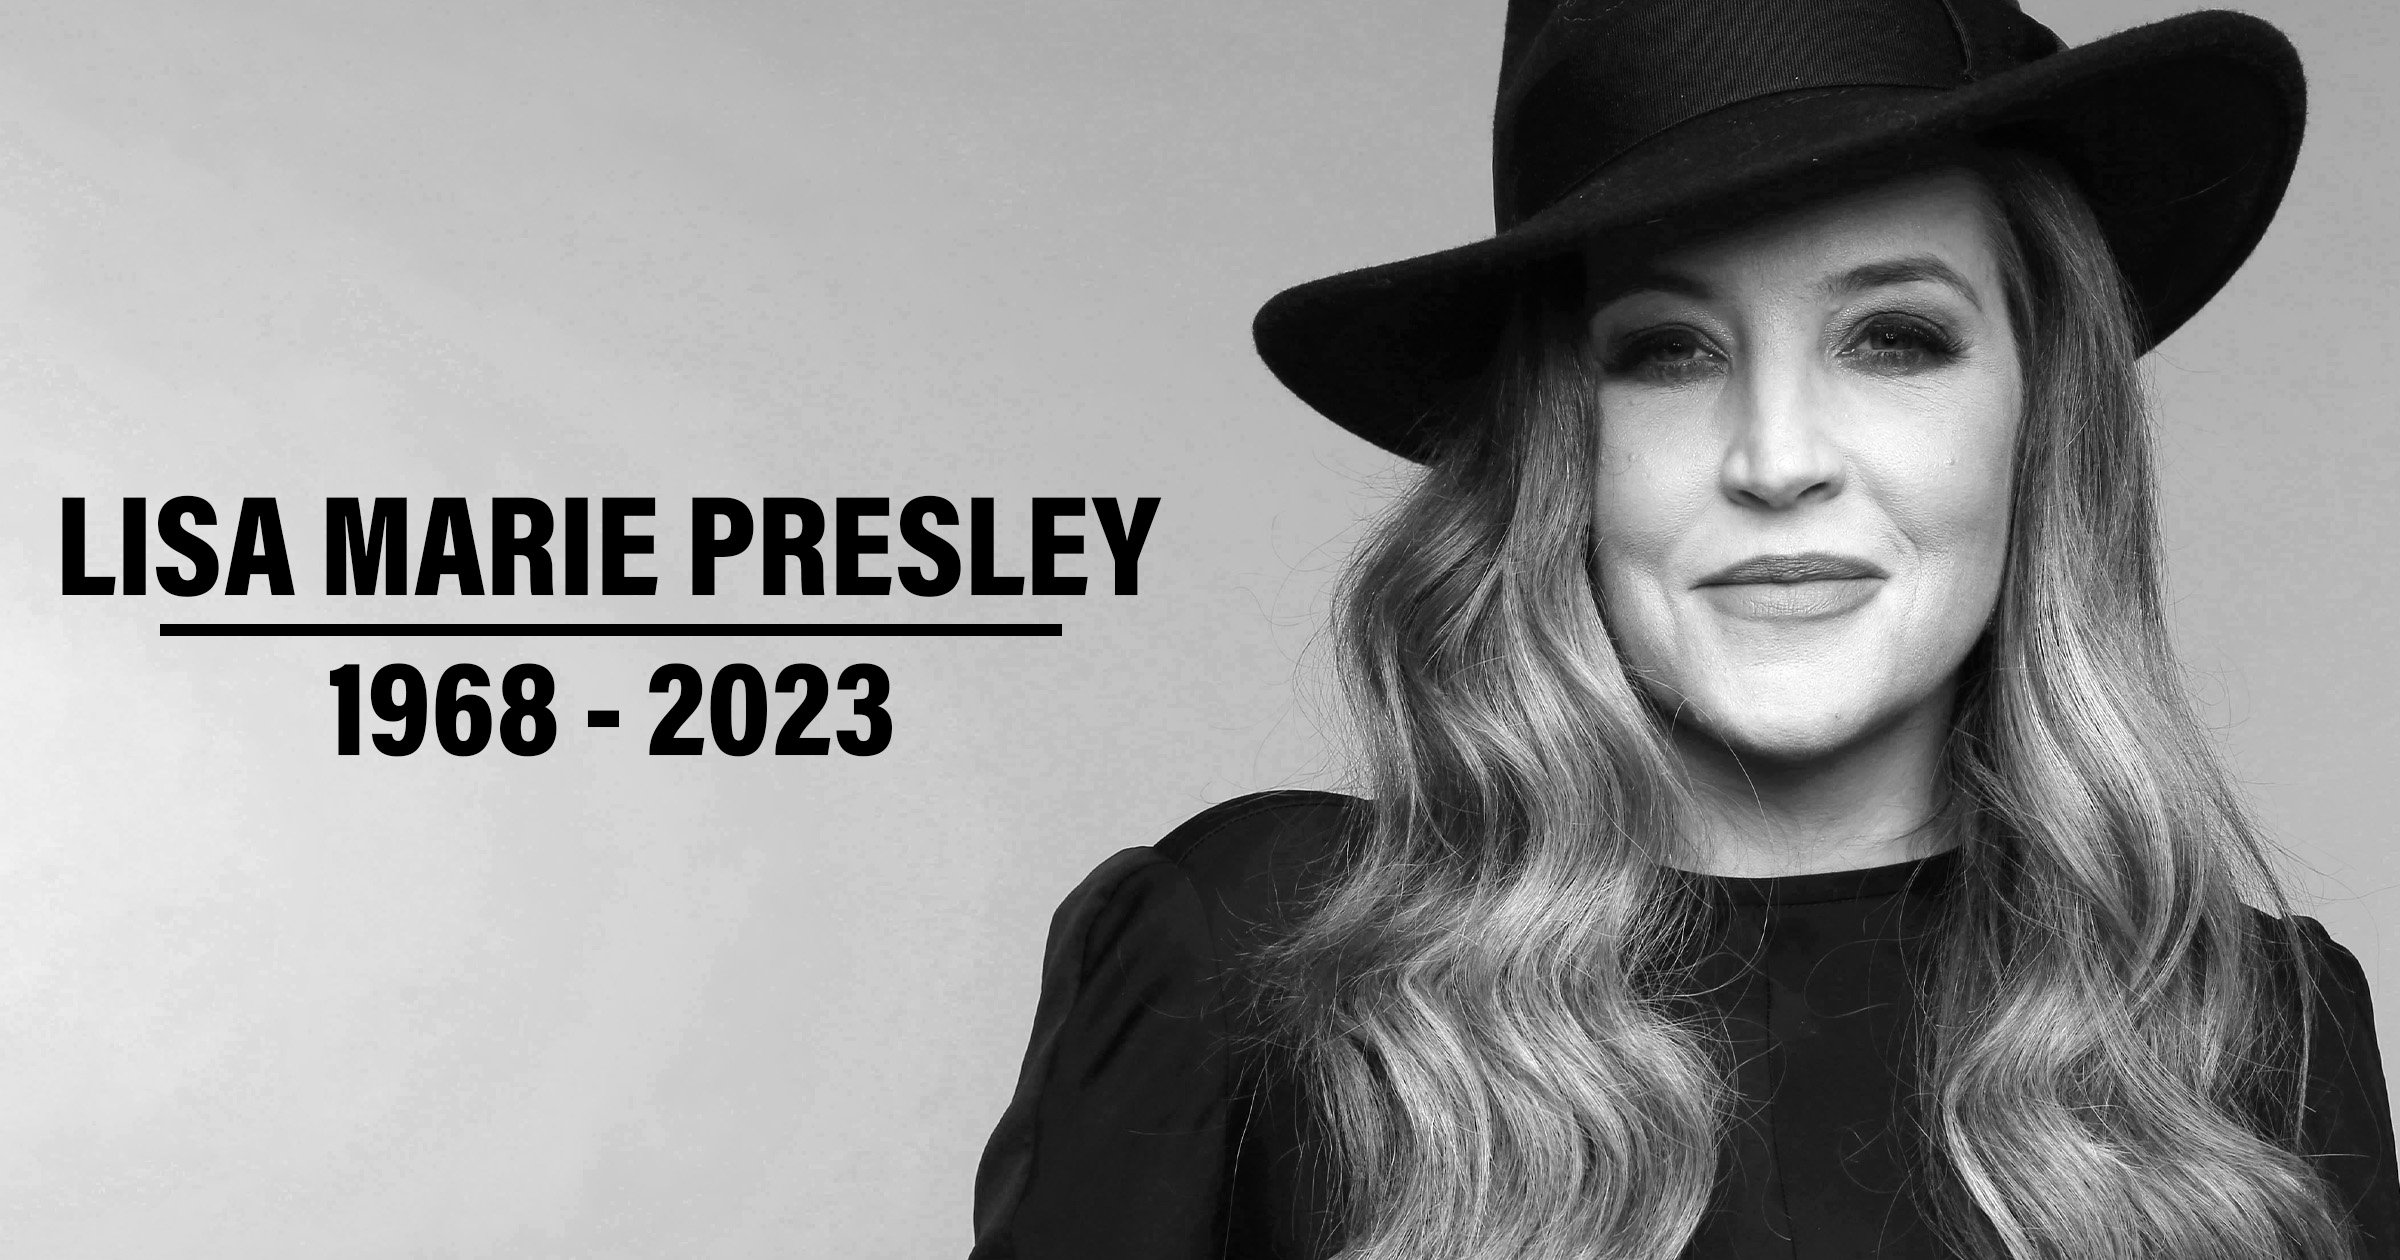 The King's daughter's Lisa Marie Presley passing at 54